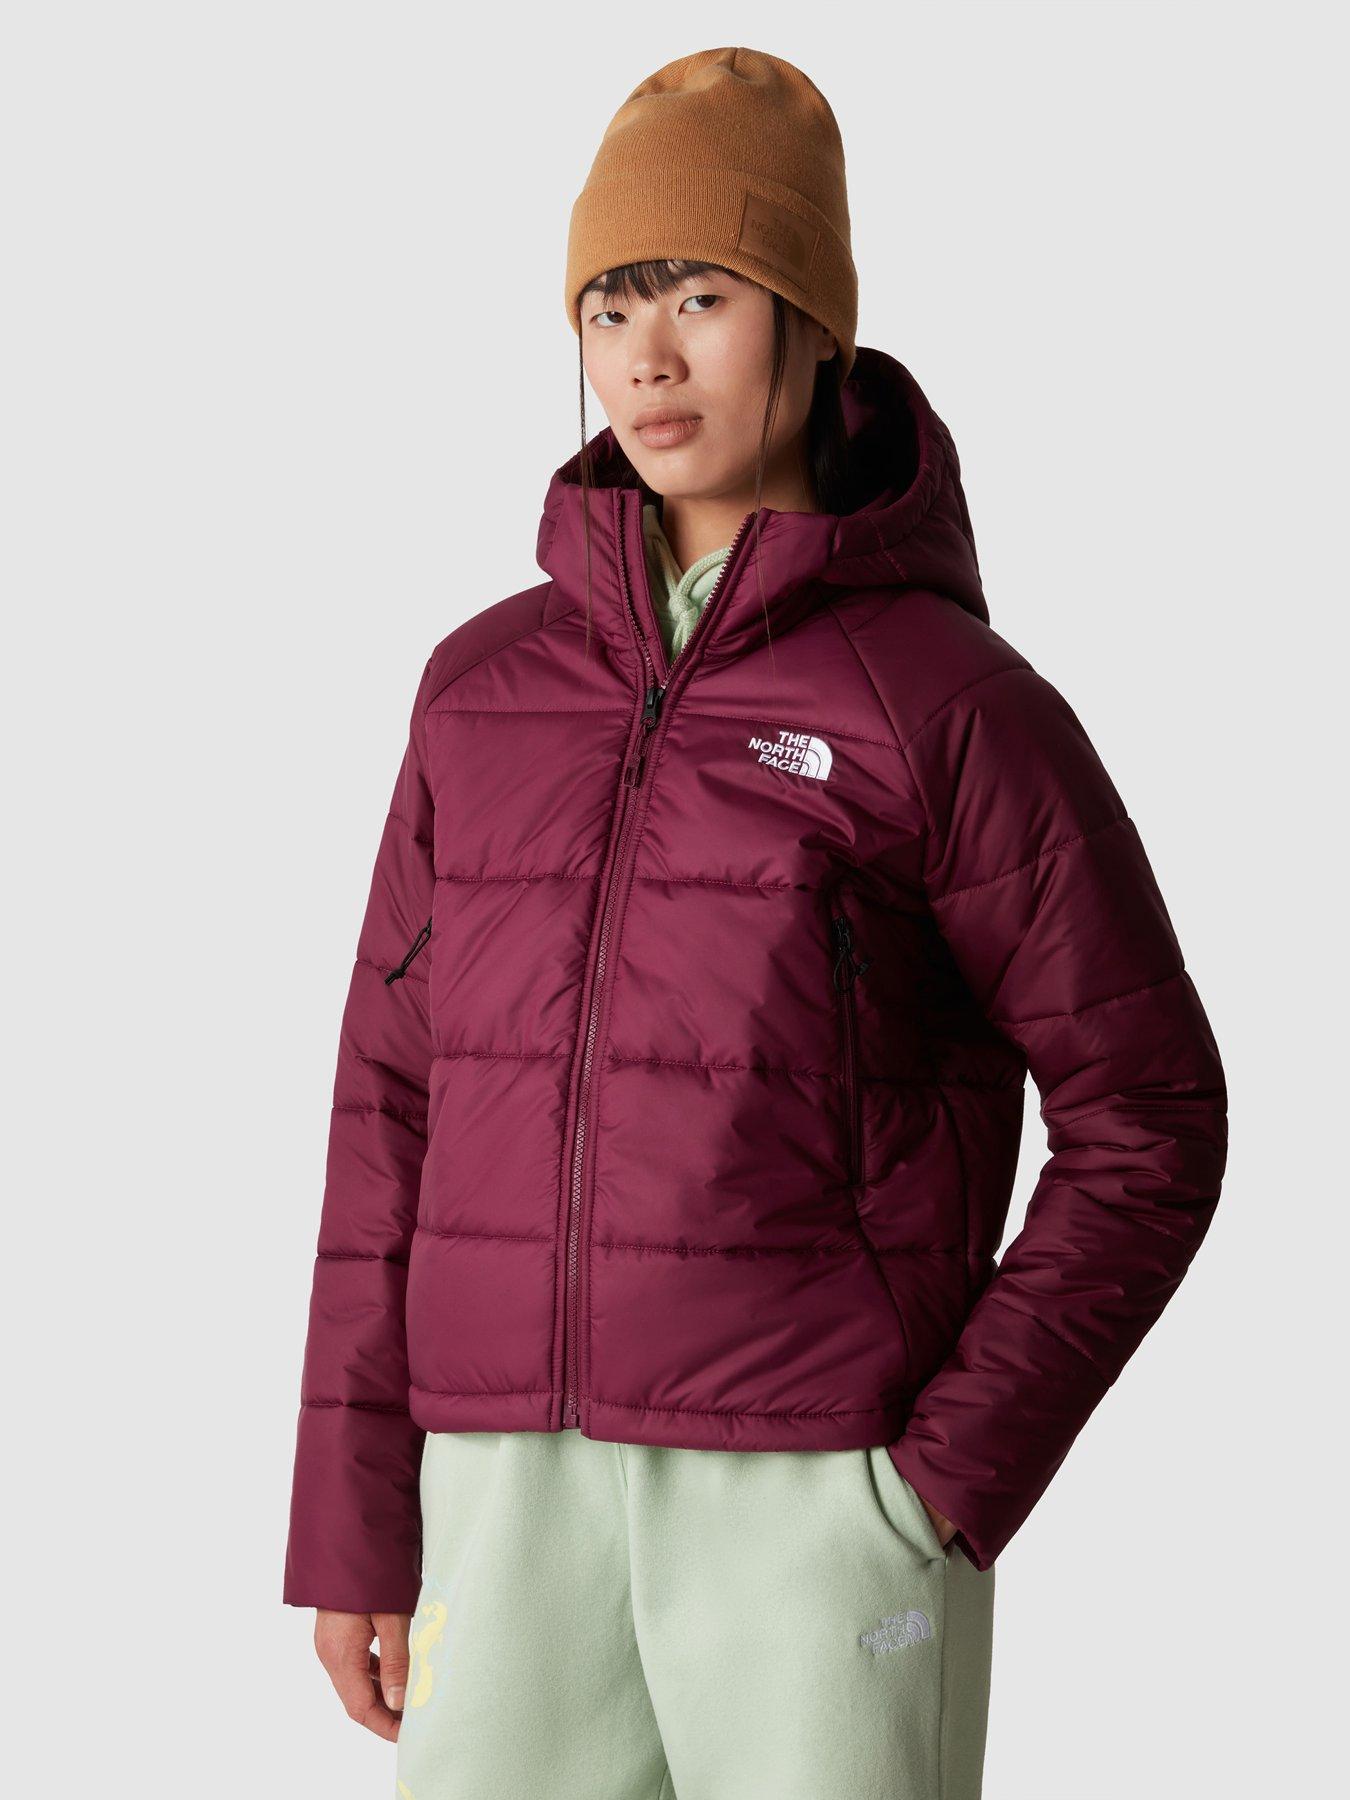 Stay Stylish and Warm with Women's North Face Jackets